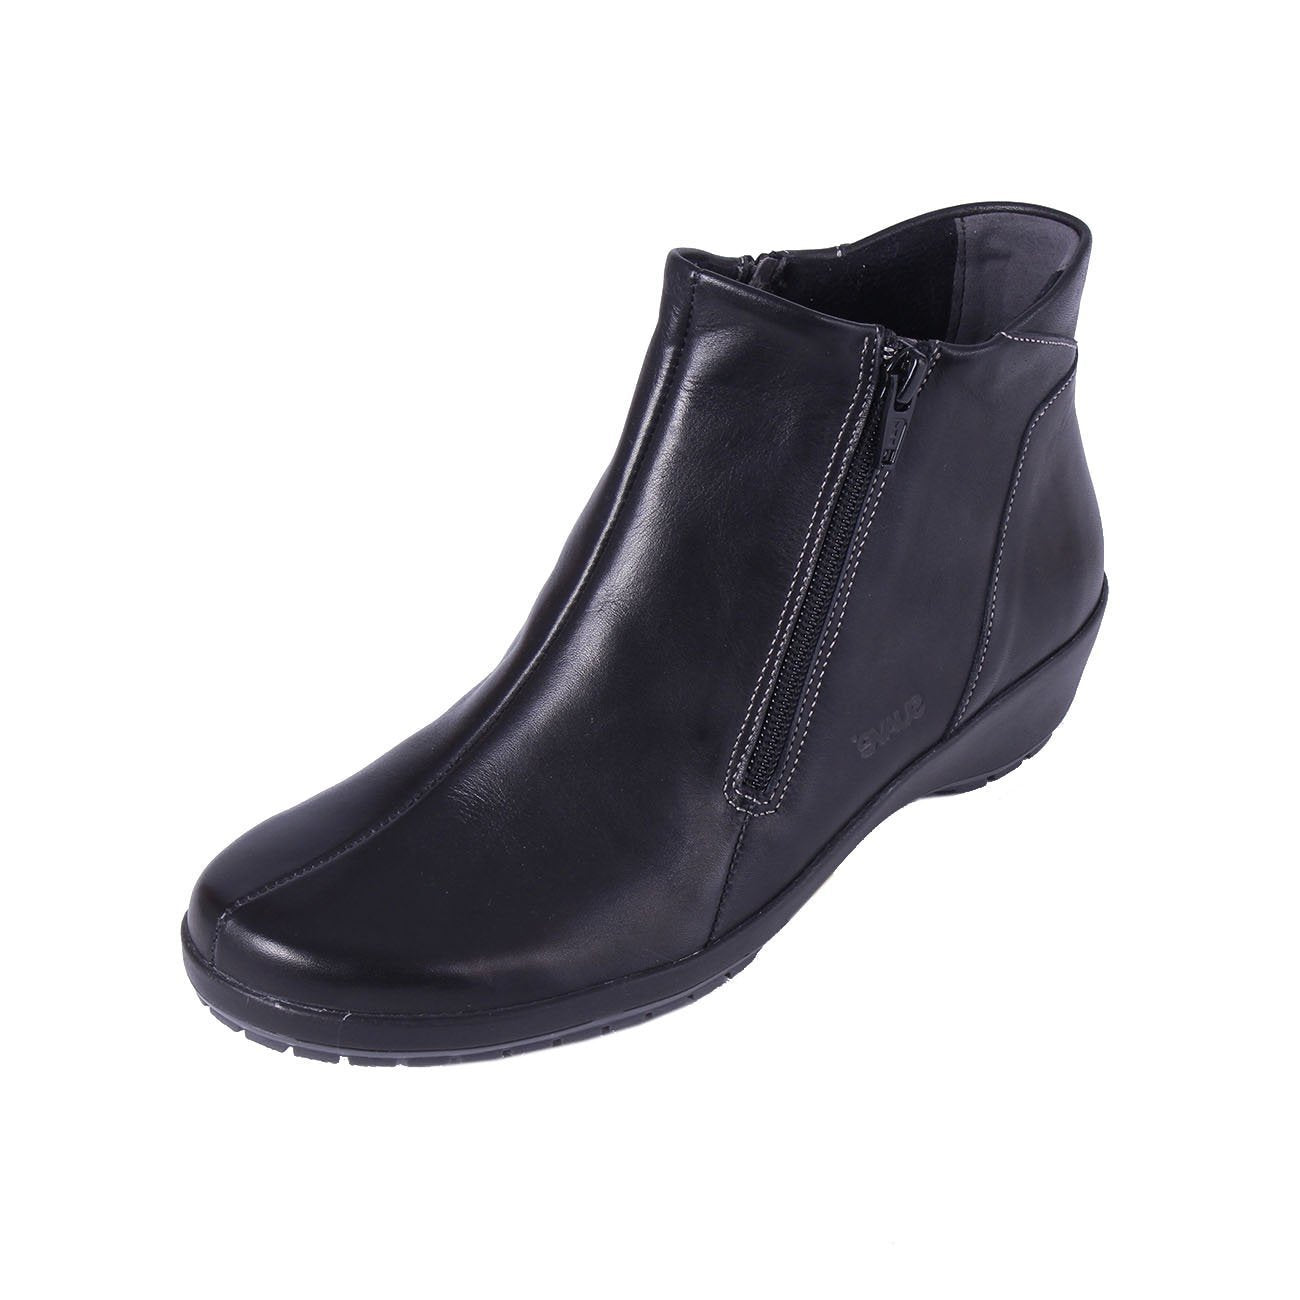 Women's Boots with Arch Support, Aetrex